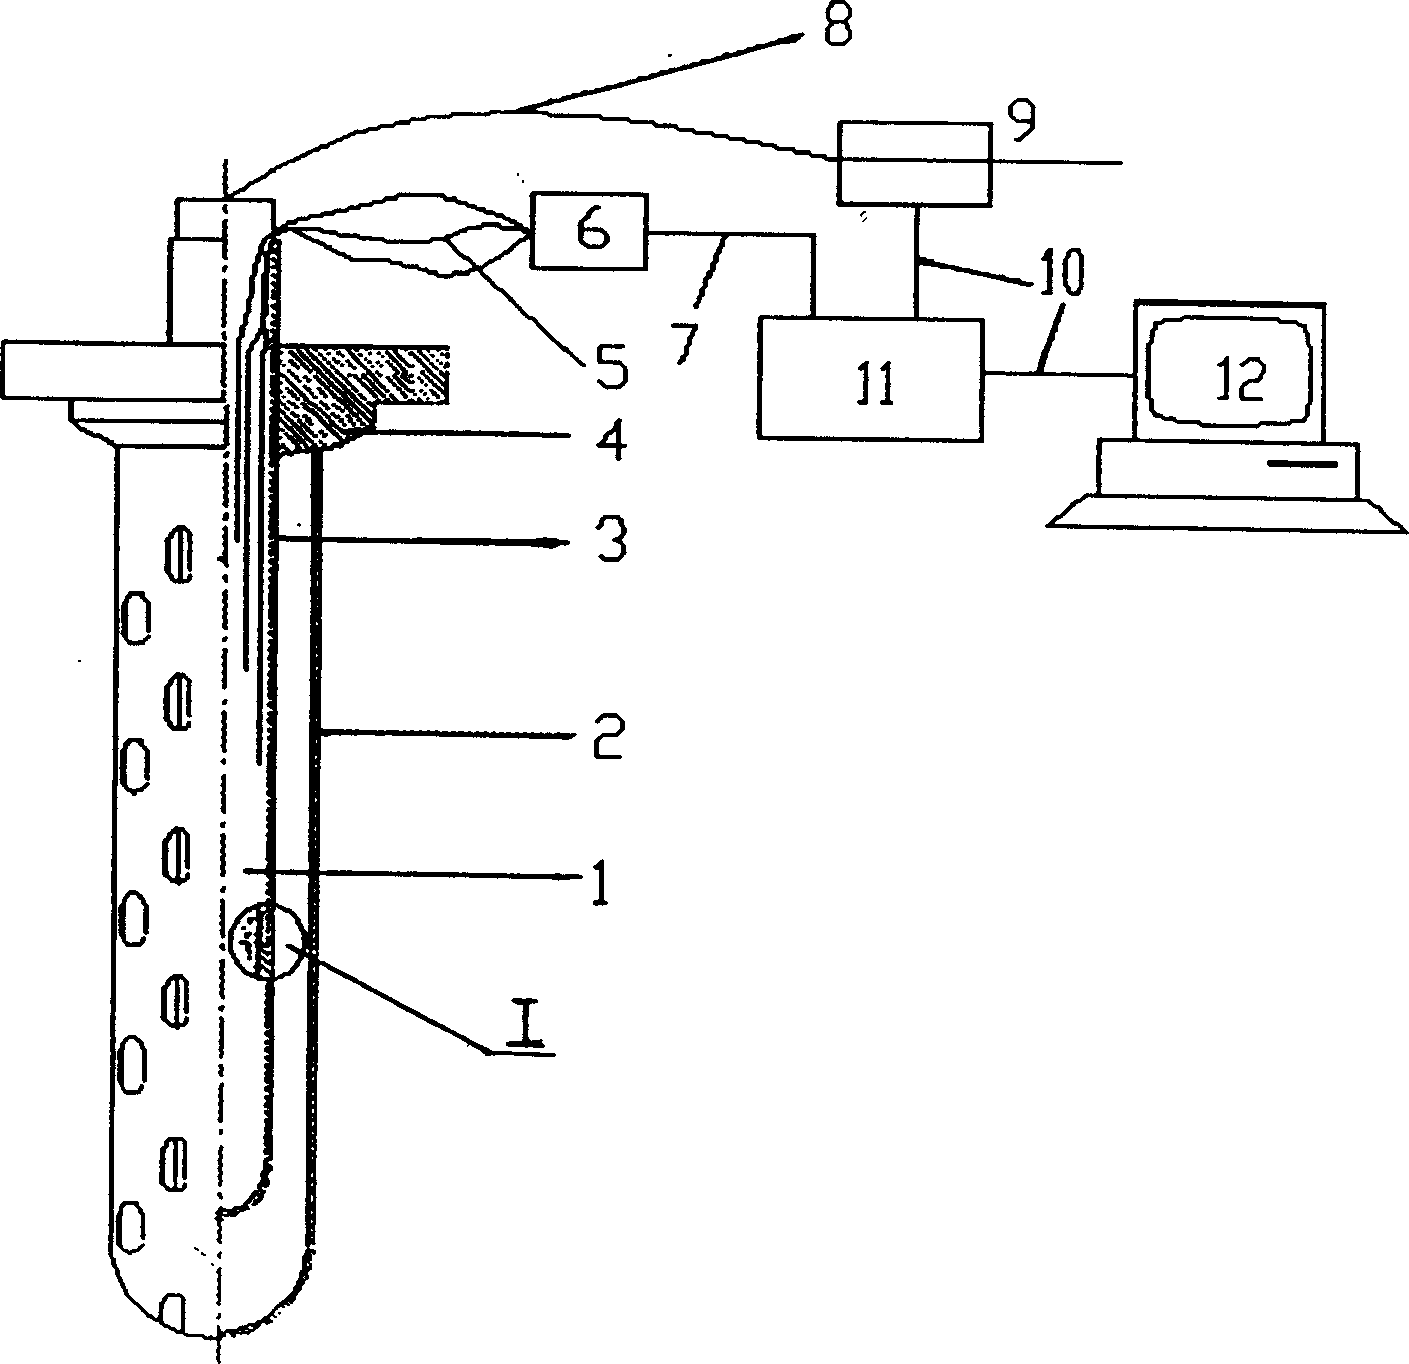 Core level monitoring device for reactor